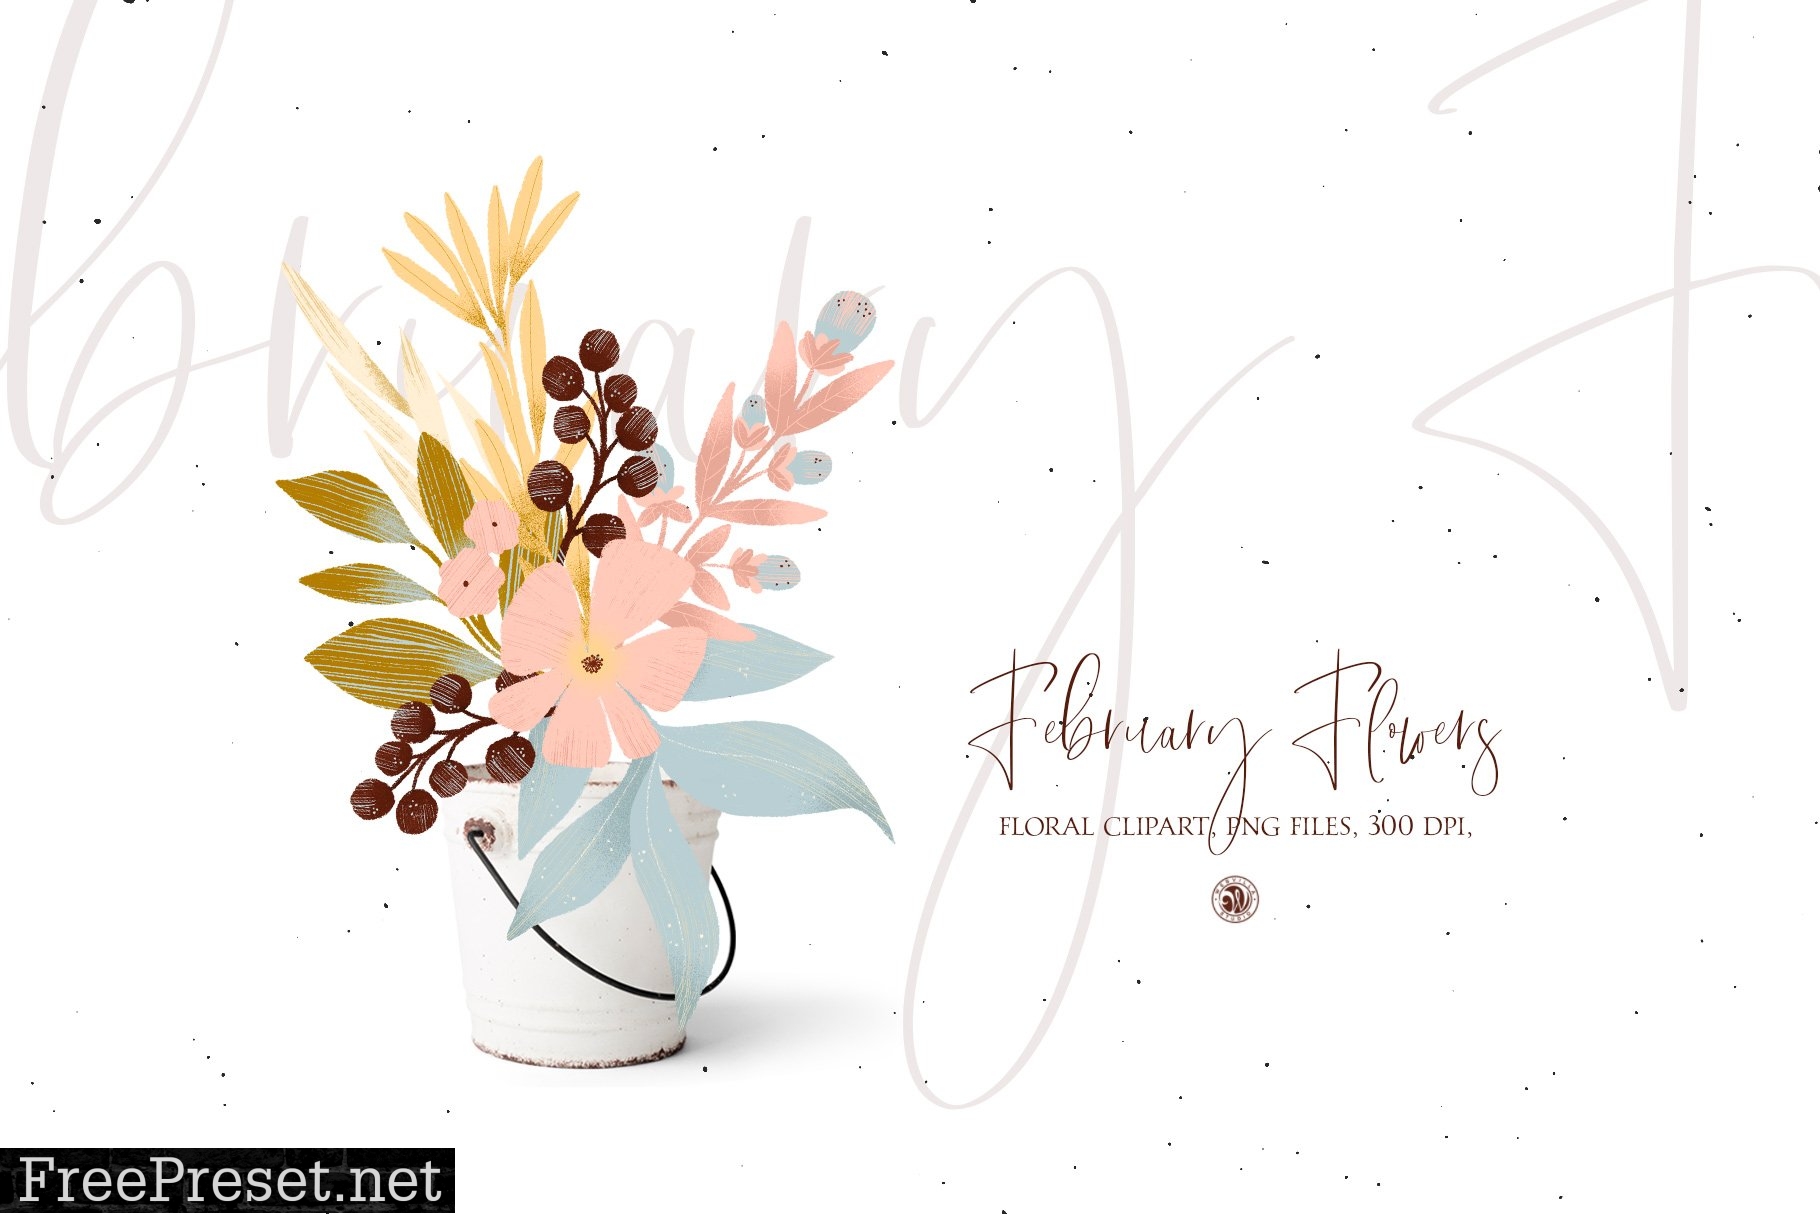 February Flowers floral clipart set 5927923